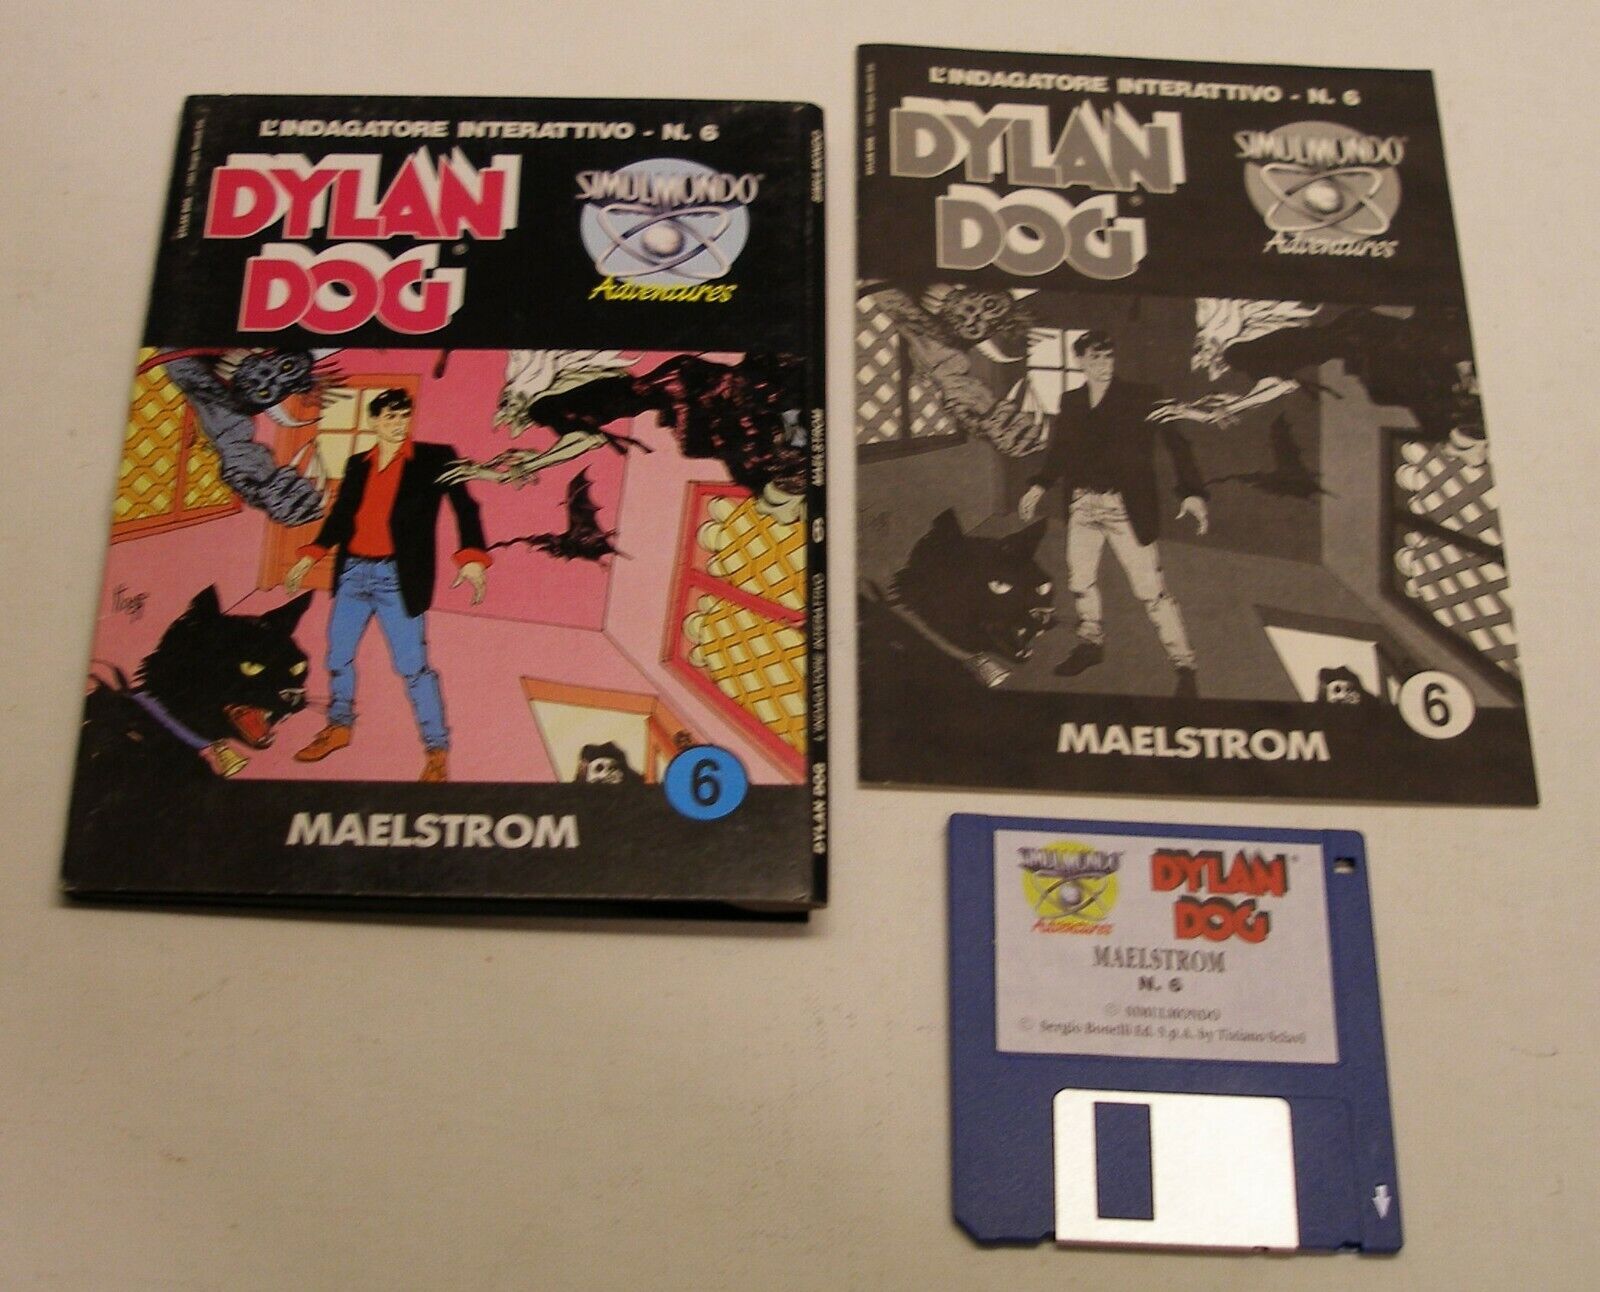 EXTREMELY RARE: Dylan Dog 06: Maelstrom by Simulmondo for Commodore Amiga